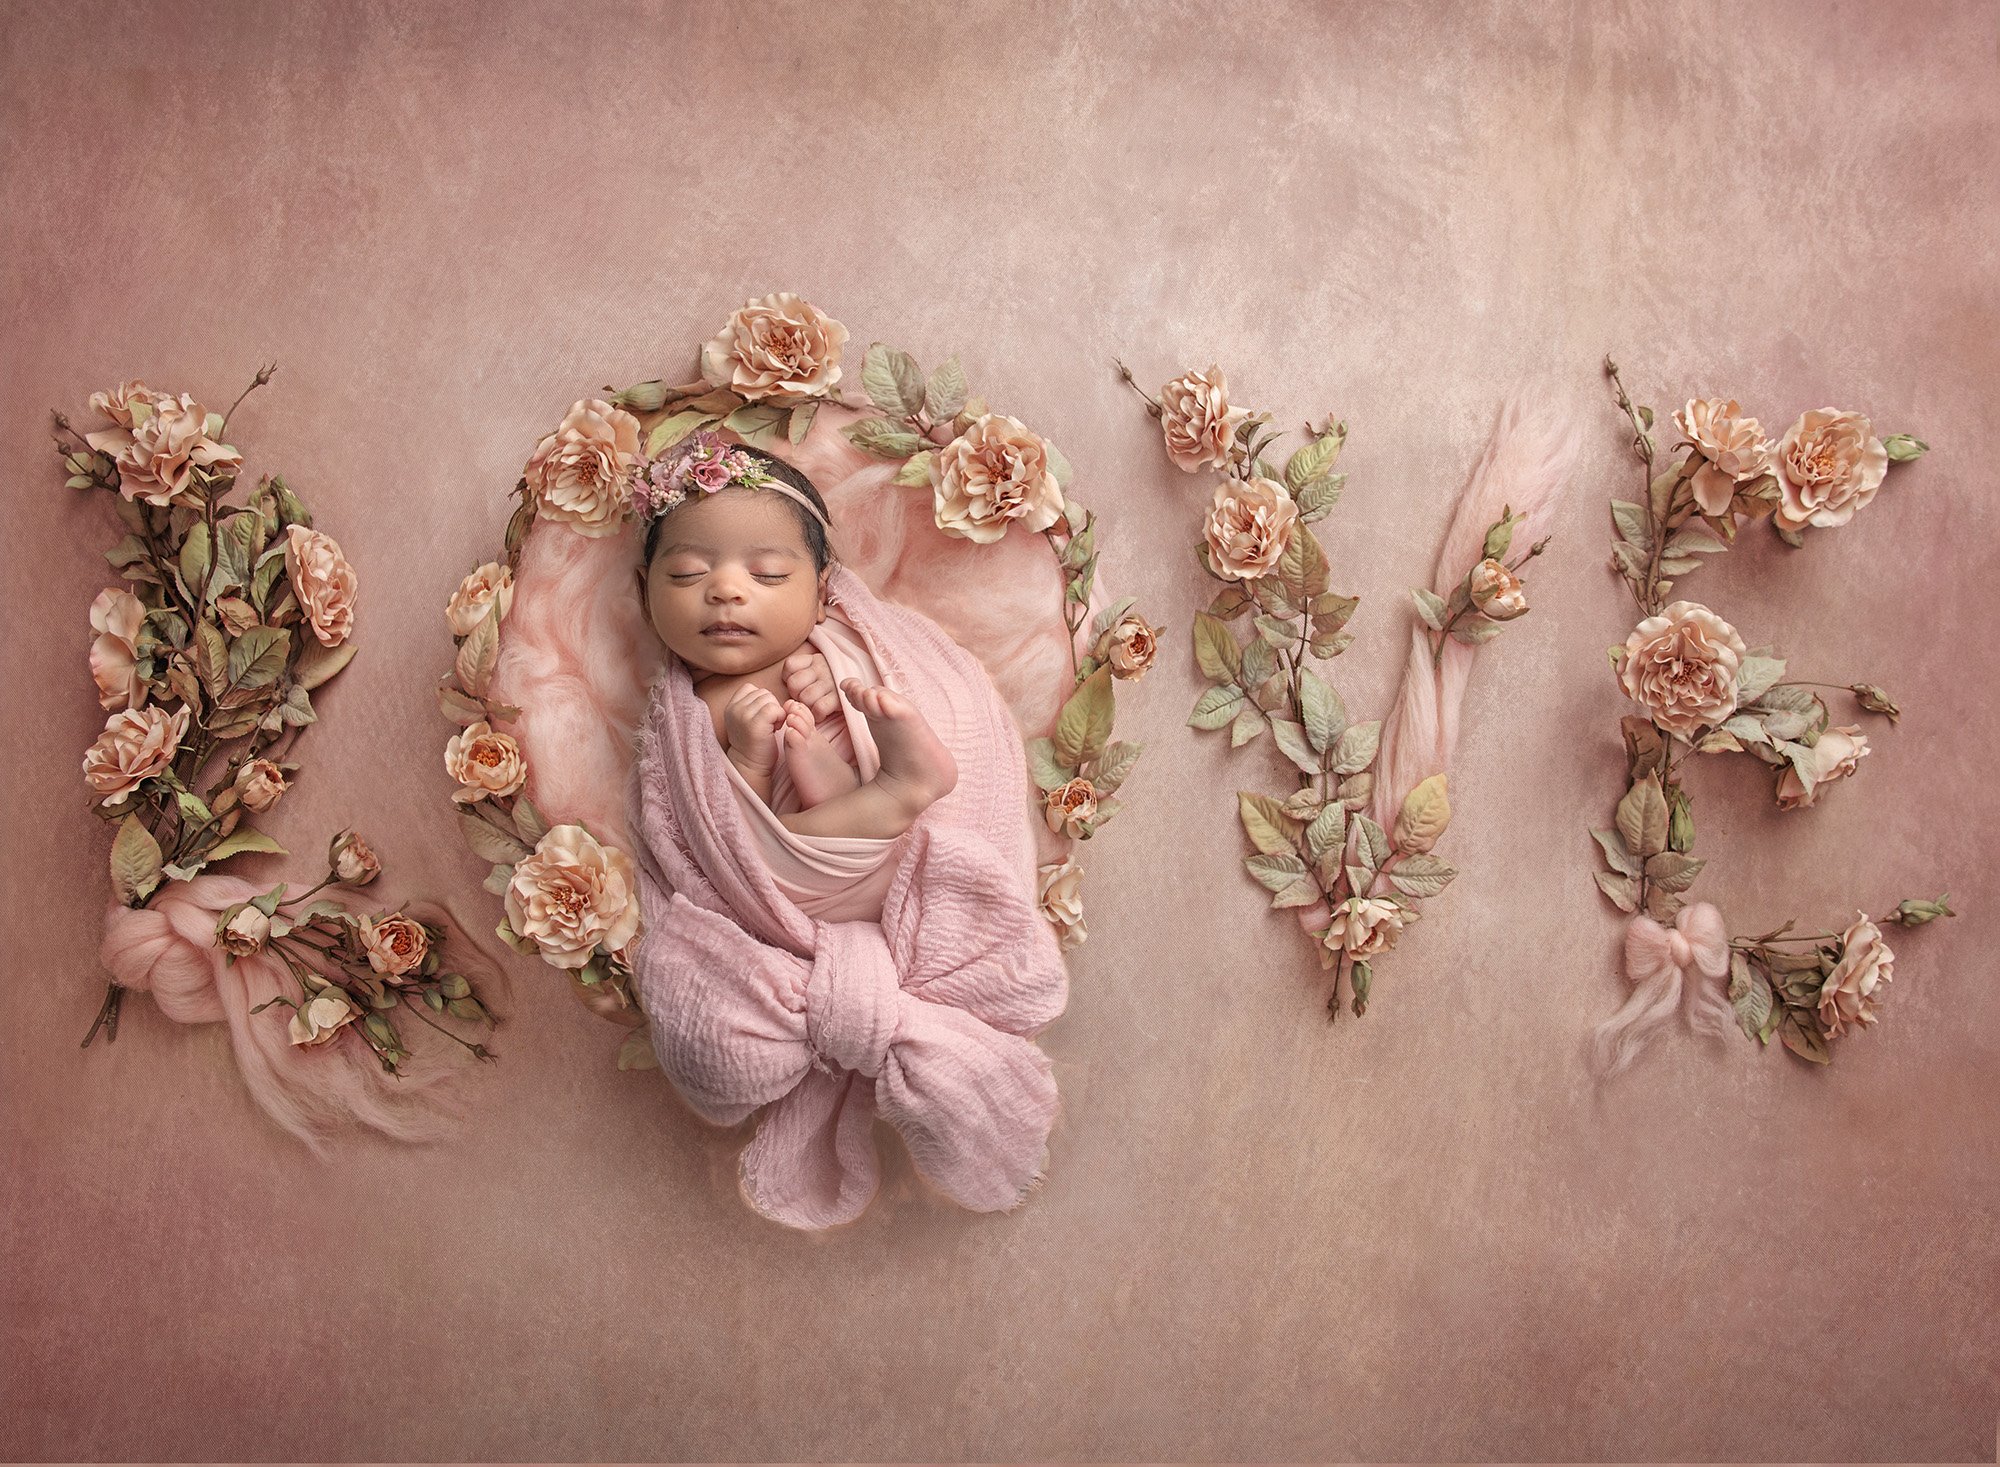 sweet newborn baby girl swaddled in pink wrap asleep on a pink background spelling out the word LOVE in flowers and bows